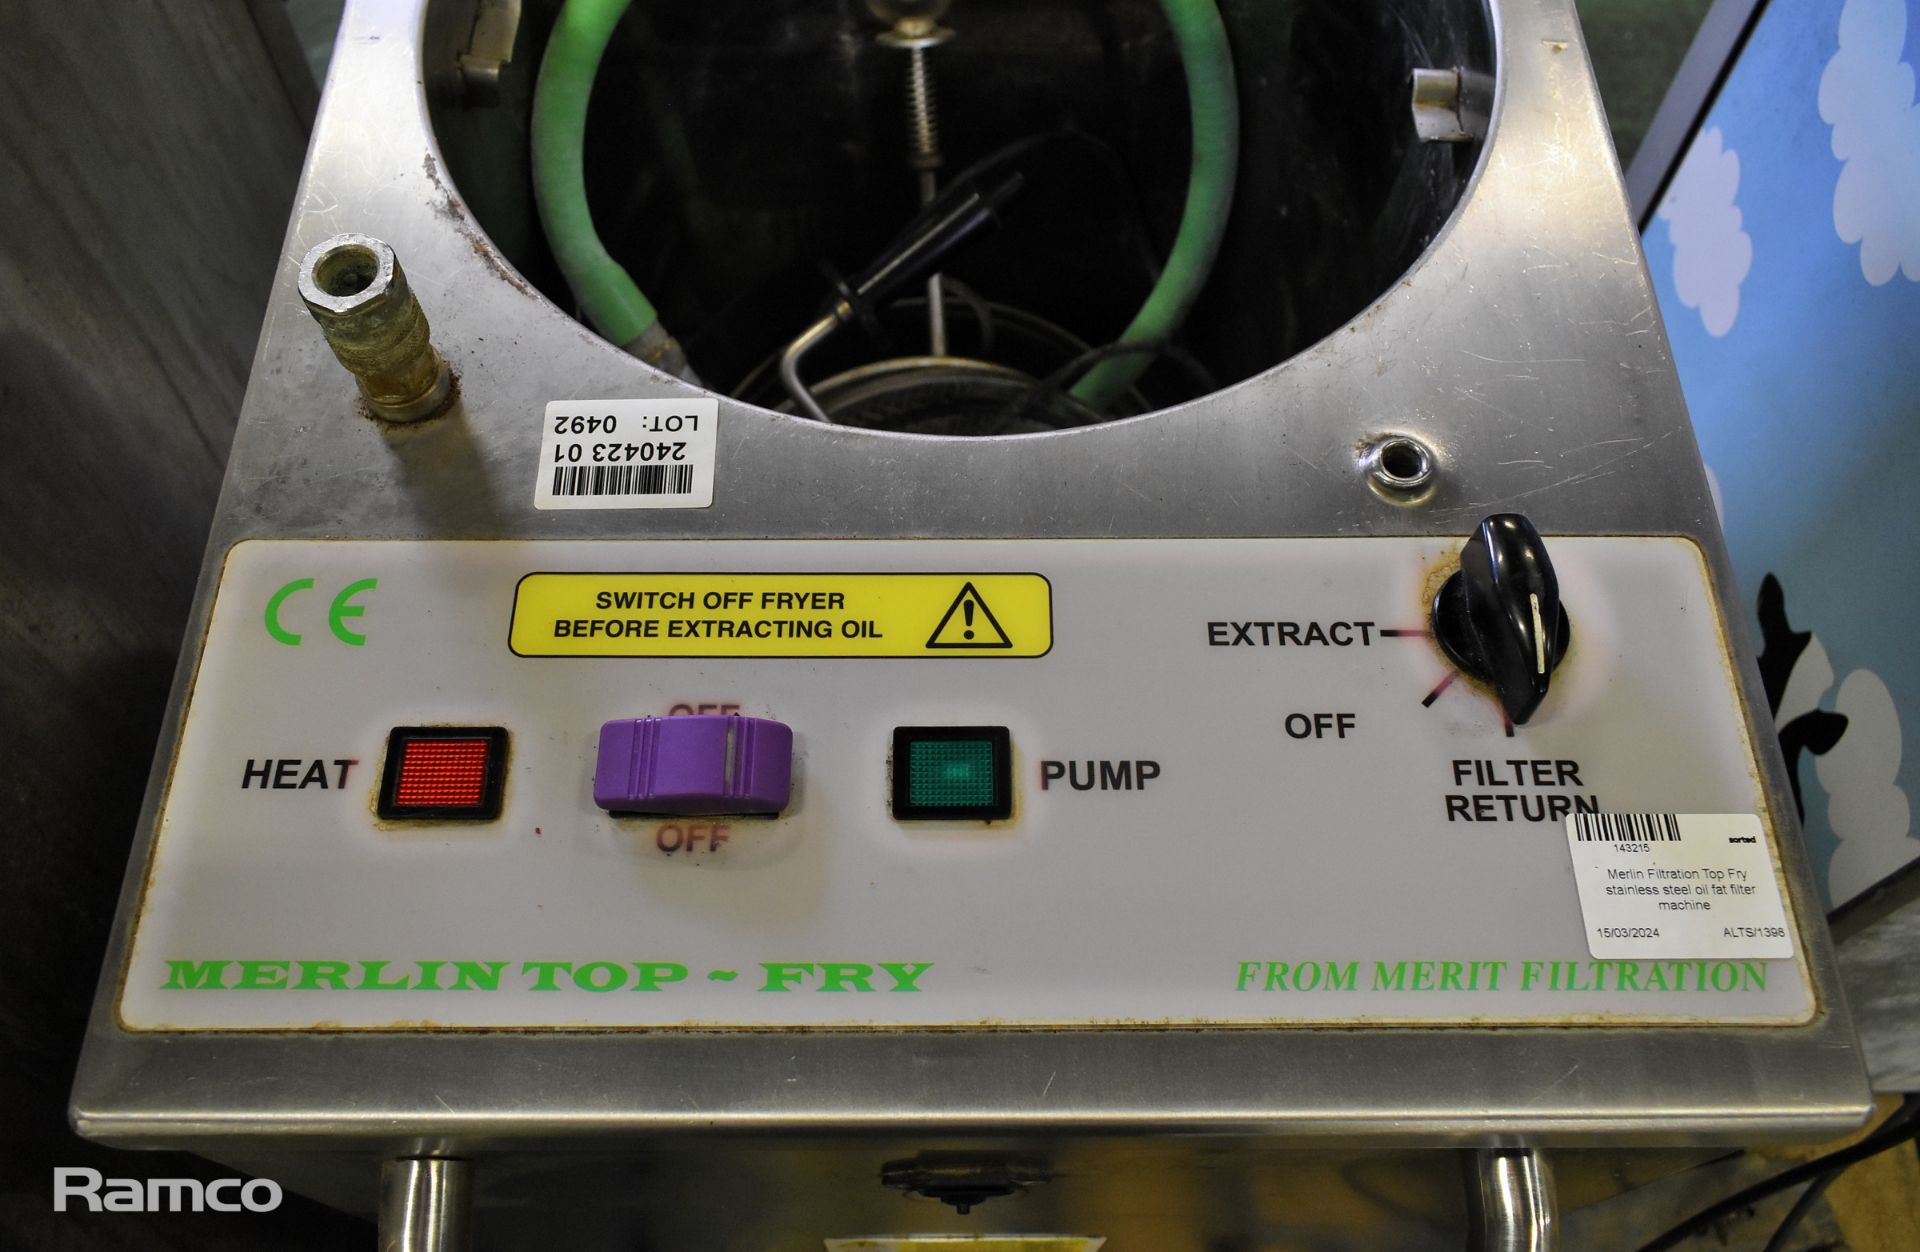 Merlin Filtration Top Fry stainless steel oil fat filter machine - Image 3 of 5